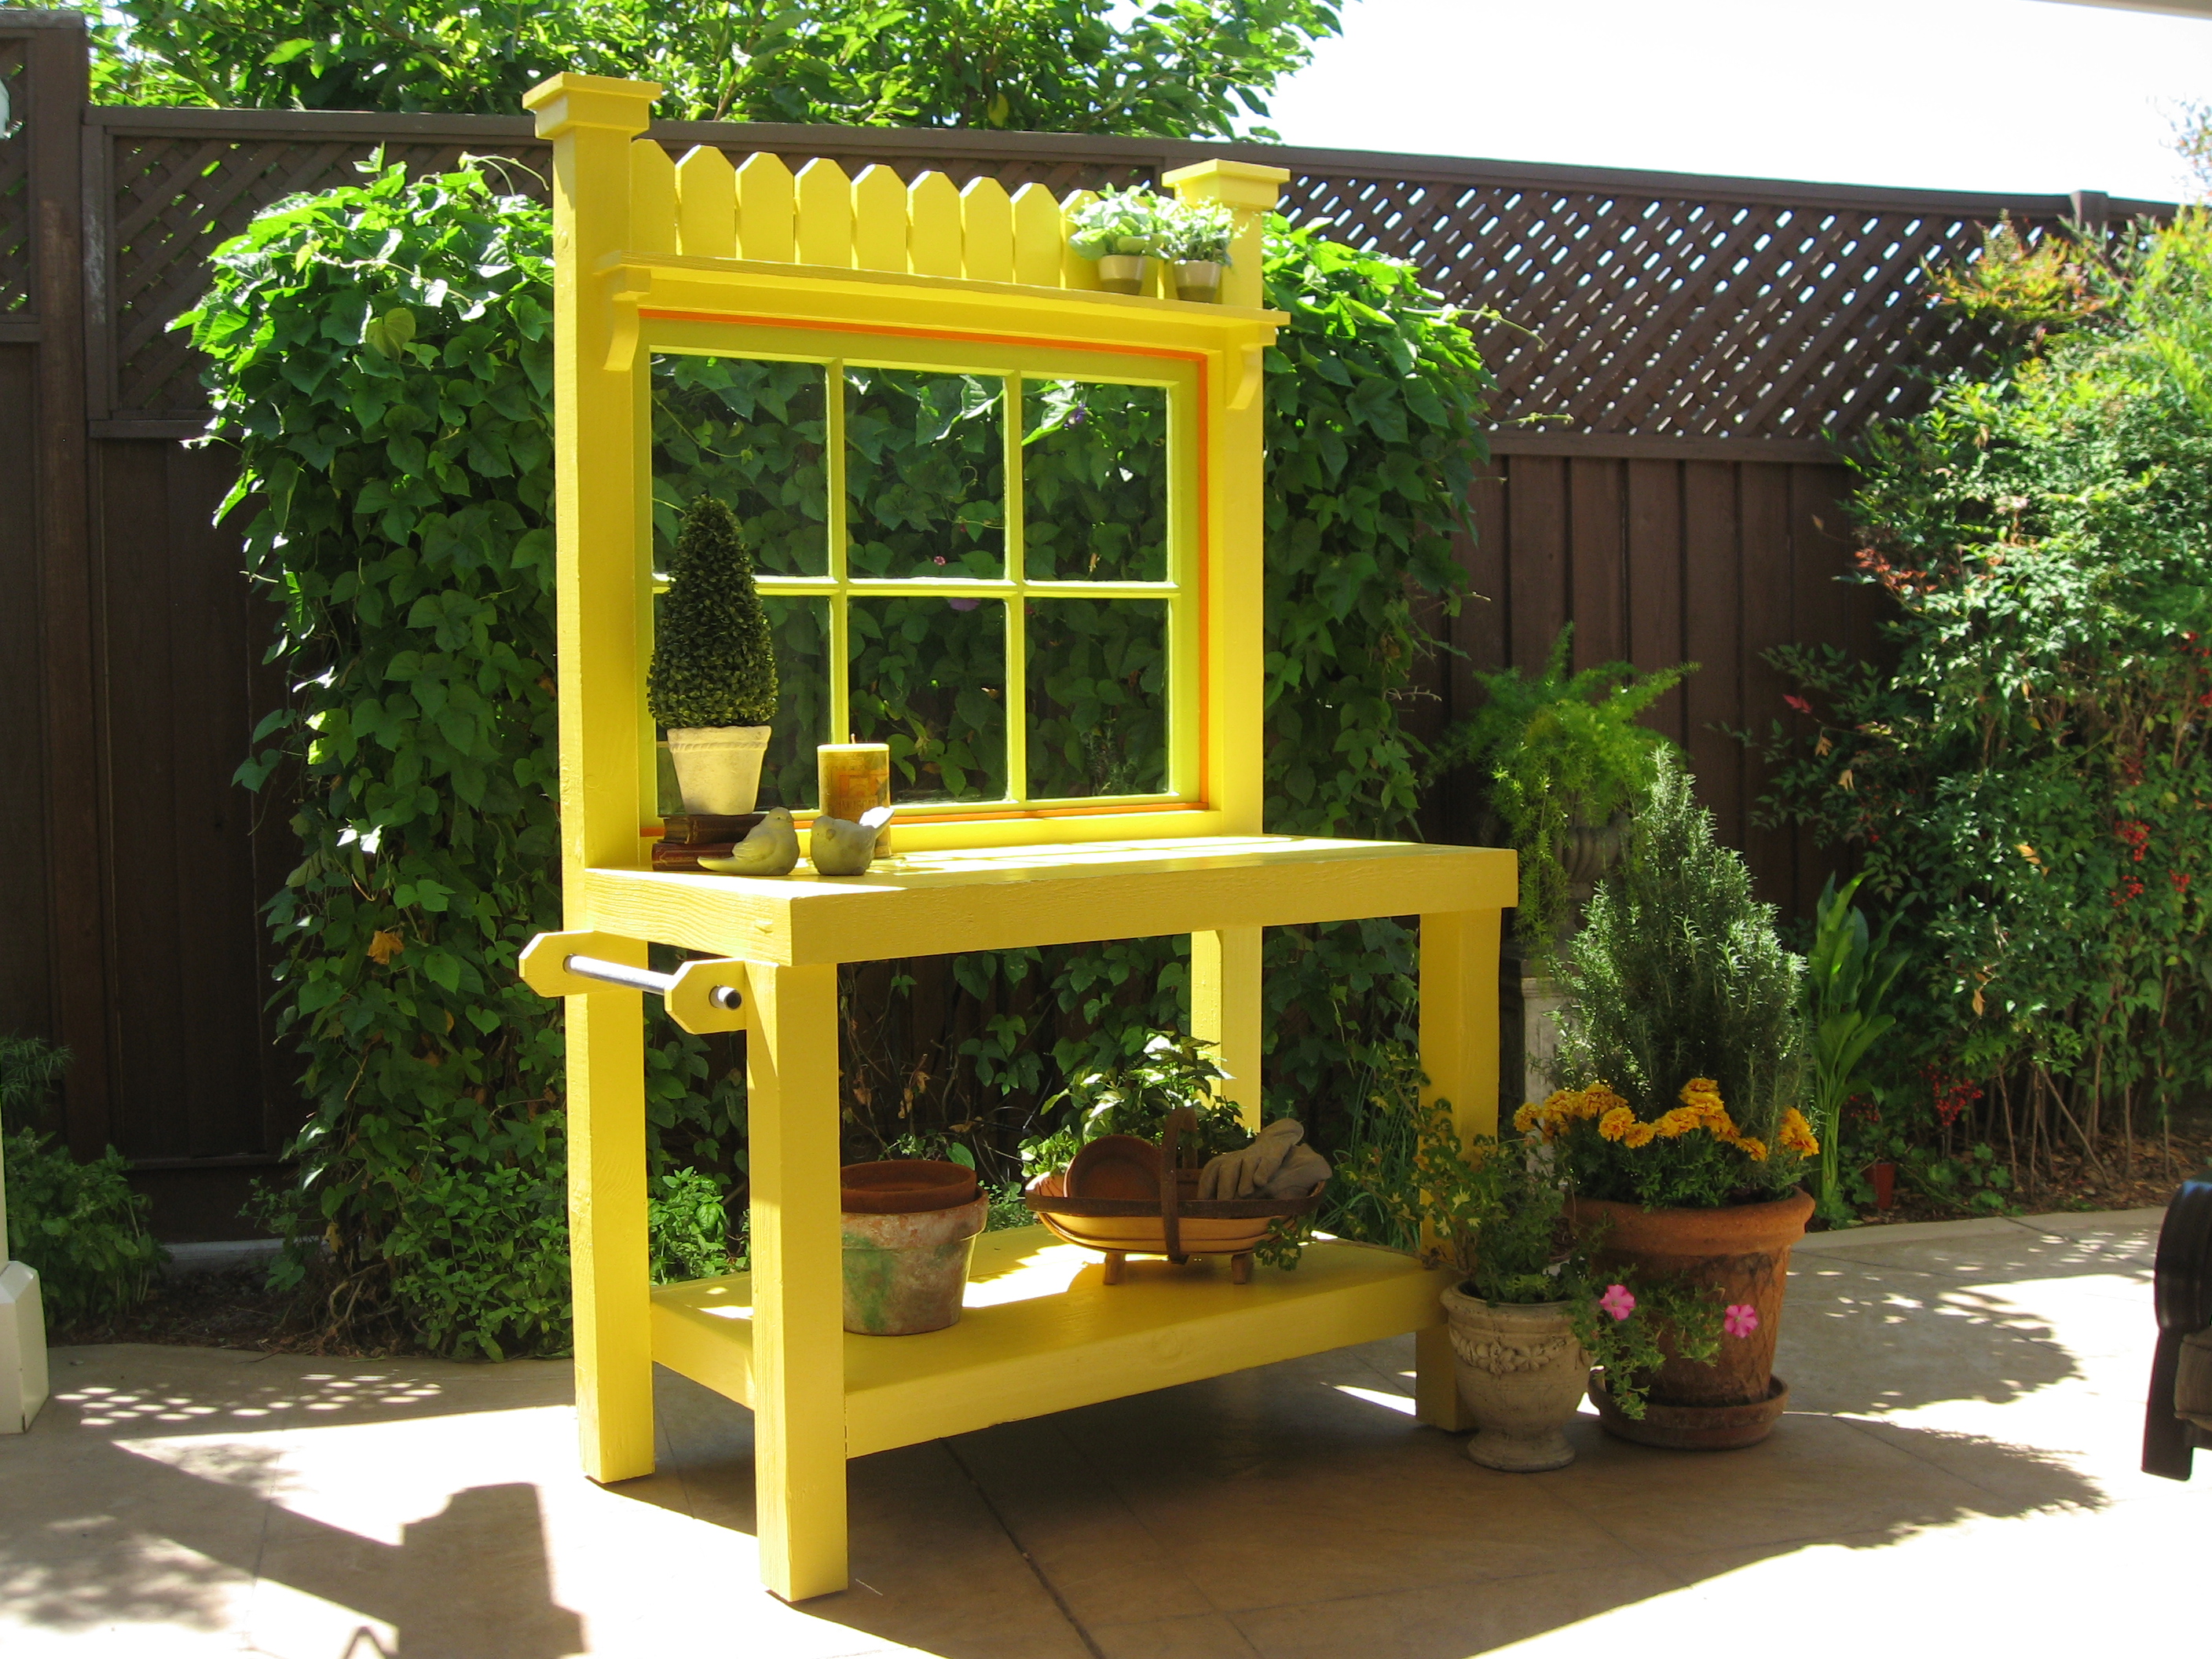 Yellow Potting Bench with Vintage Window